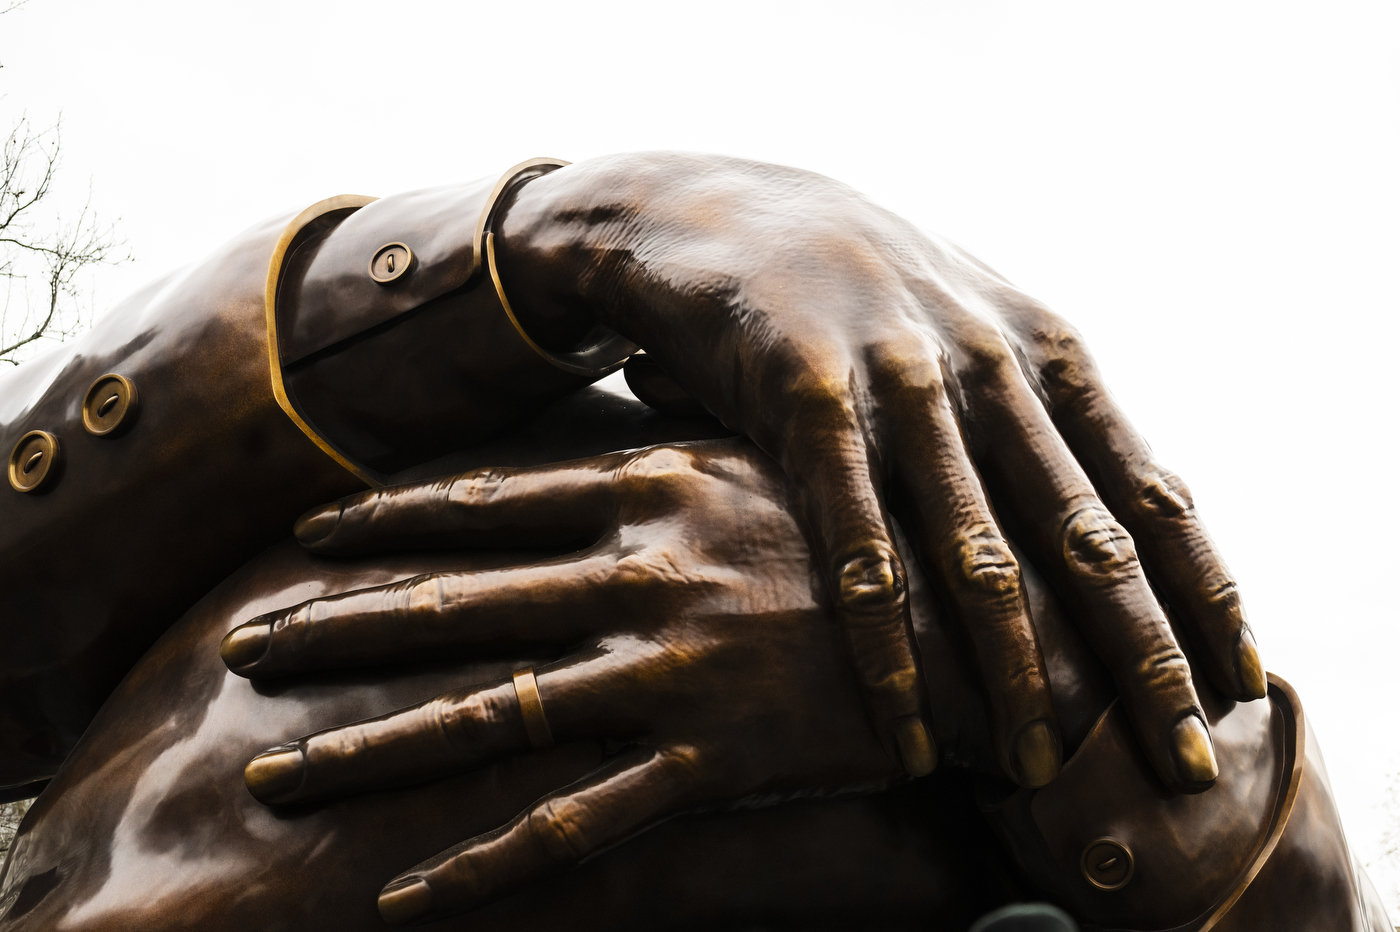 a close up picture of the hands featured on the embrace statue